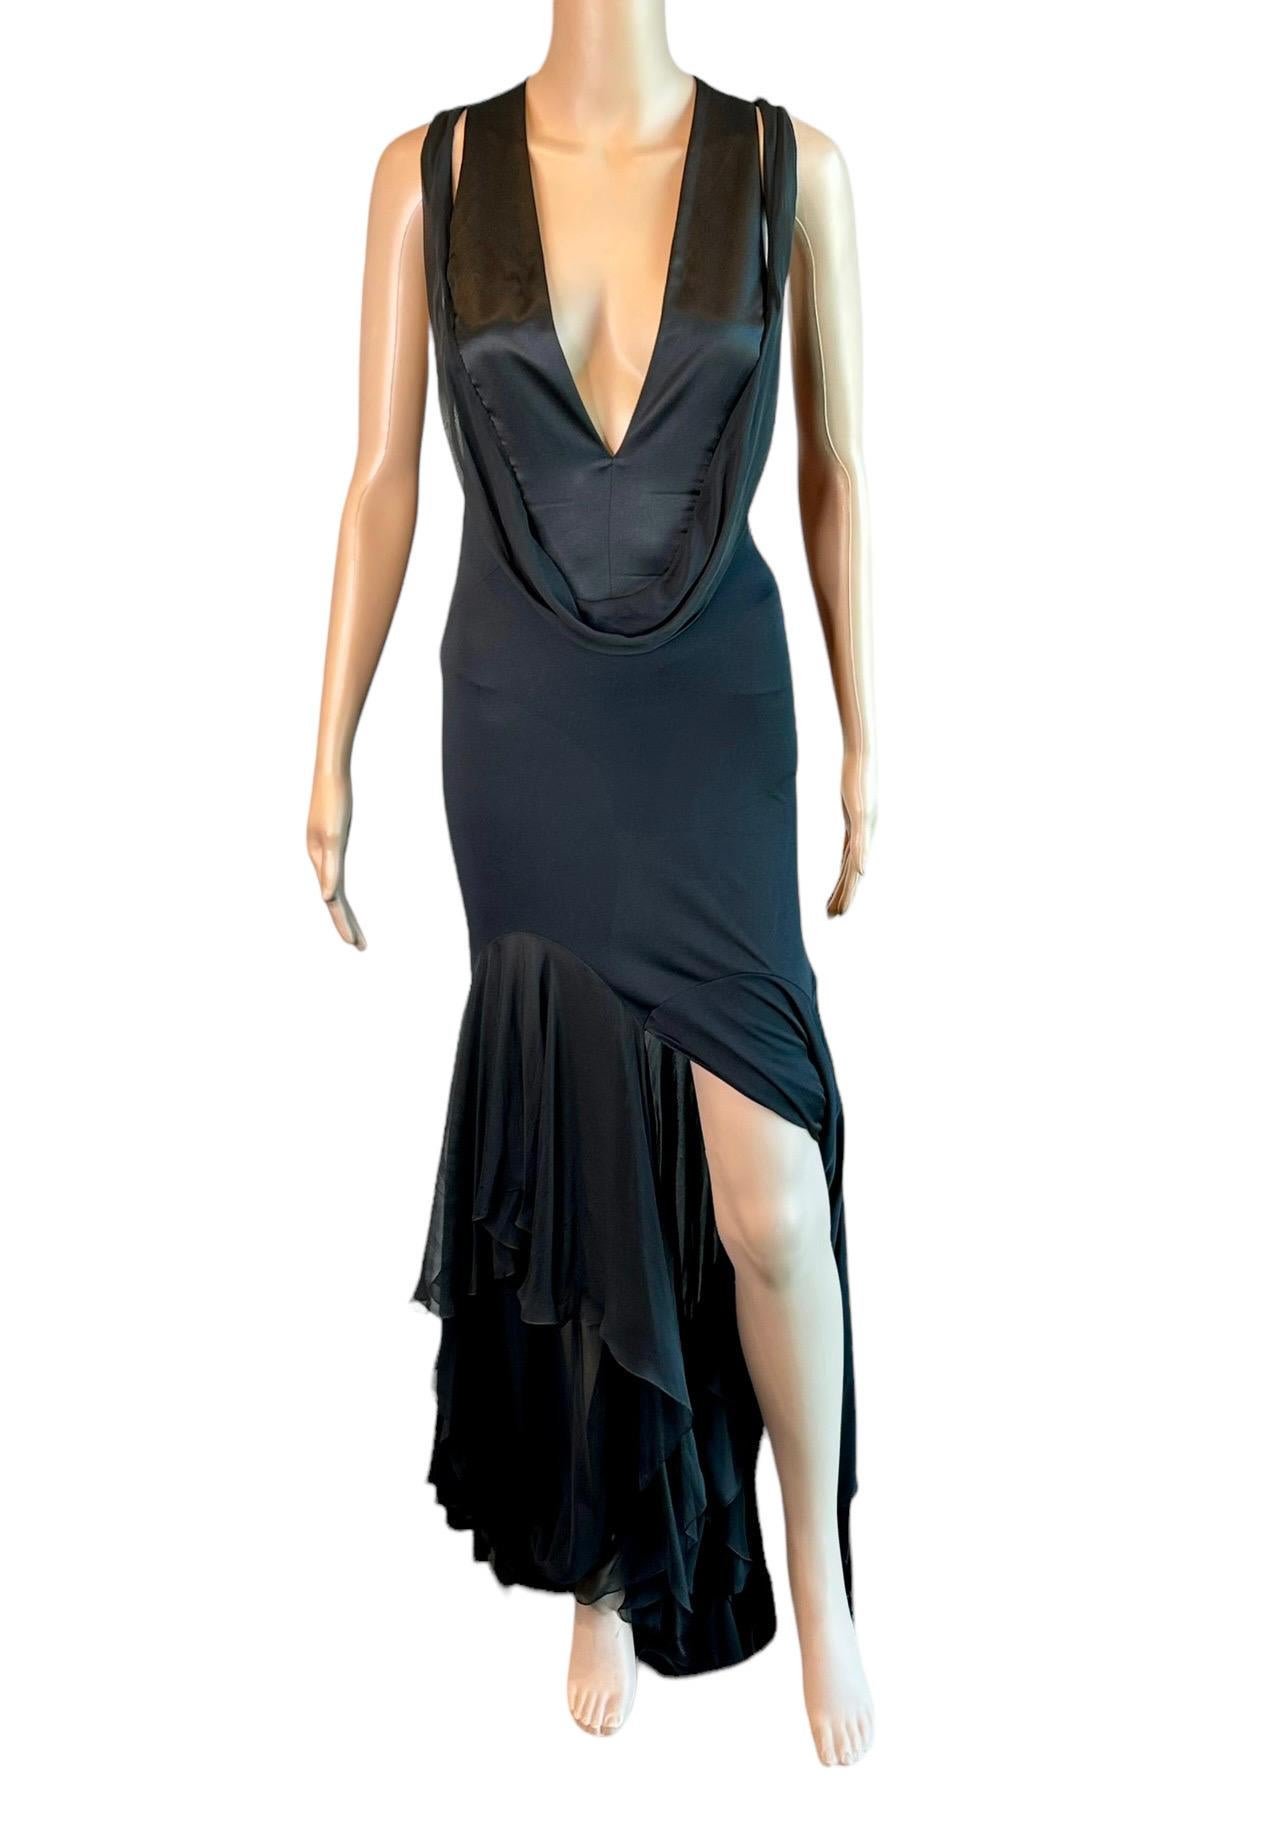 Versace S/S 2004 Plunged Halter Open Back Ruffles Black Evening Dress Gown  For Sale 10